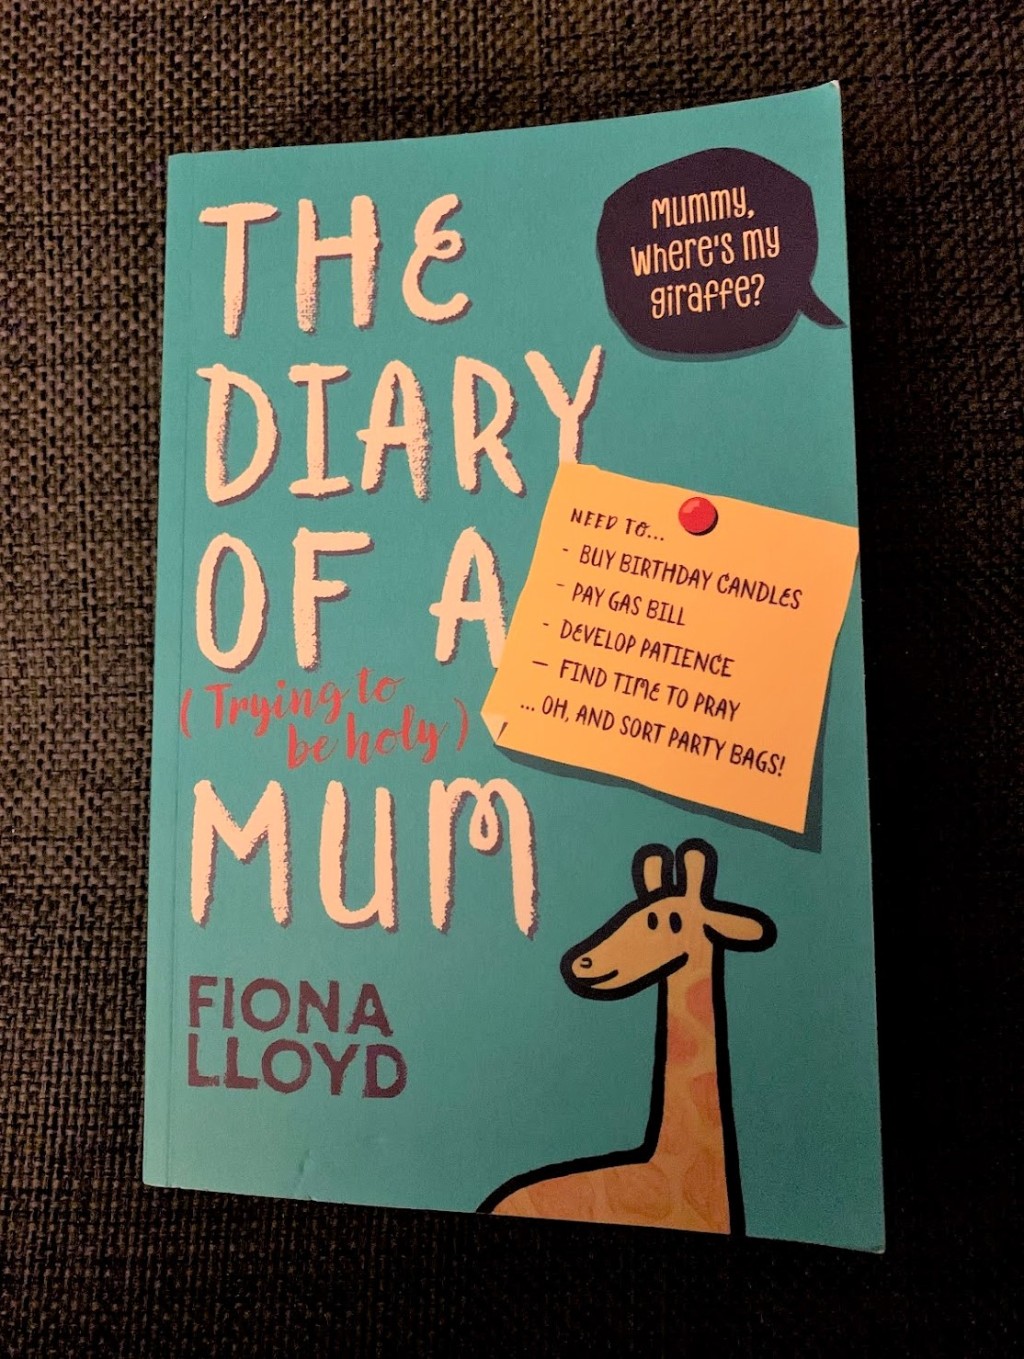 Fiona Lloyd - The Diary of a (Trying to be Holy) Mum